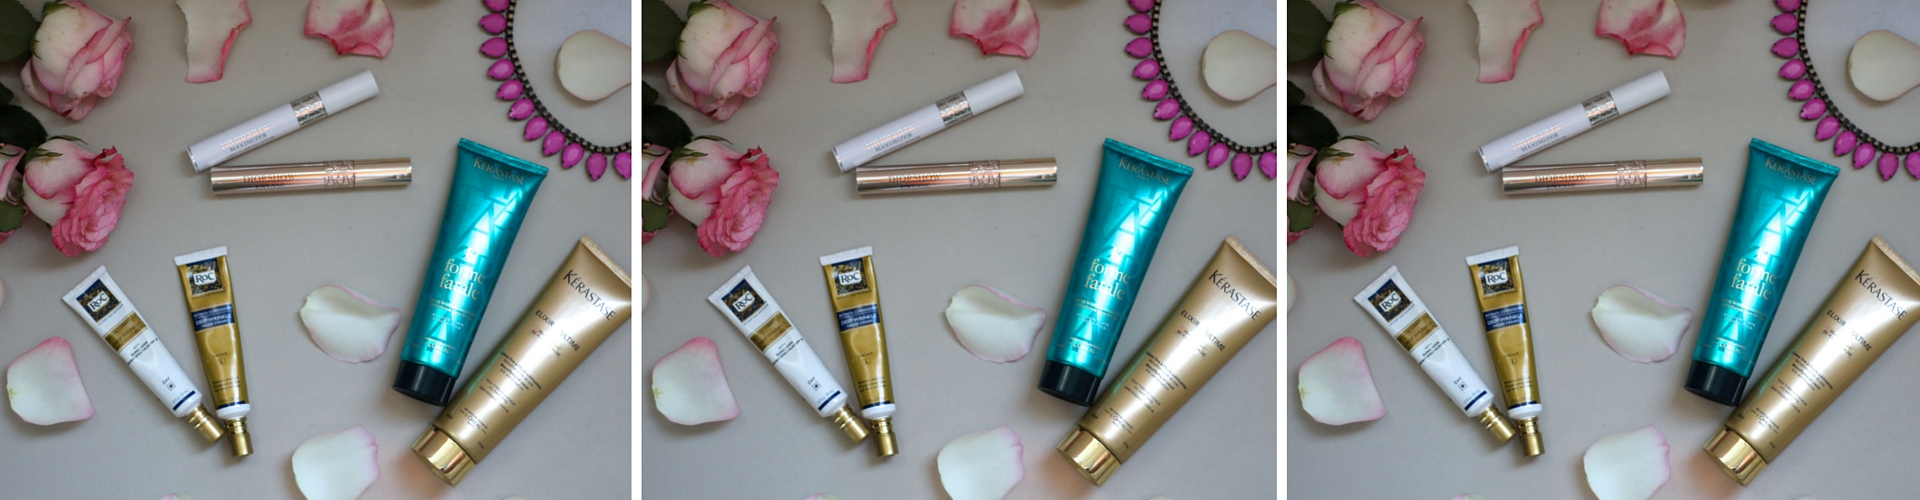 Made for each other: 3 pairs of beauty products you’ll fall in love with